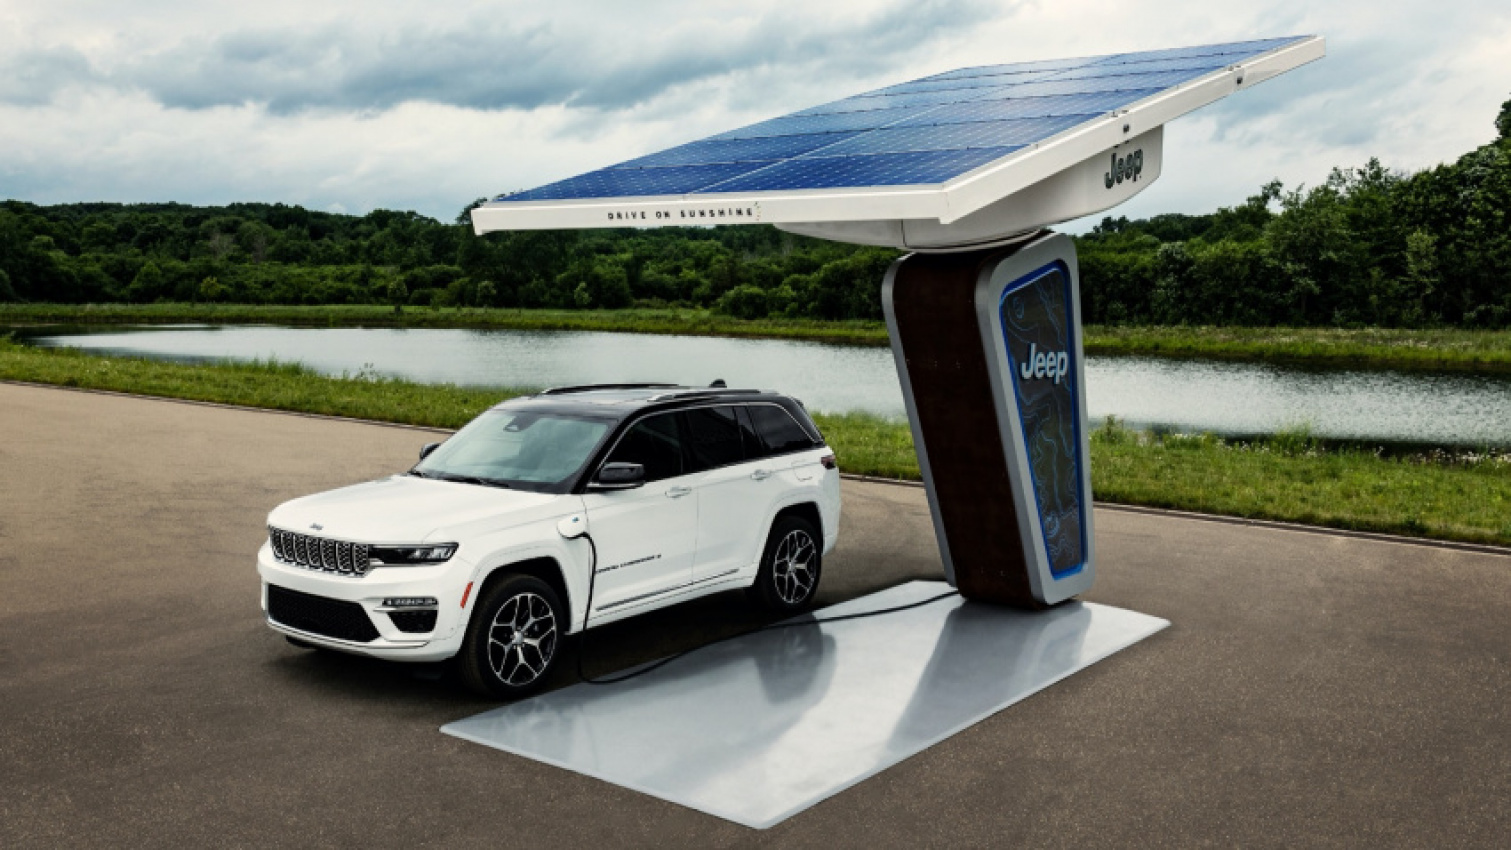 cars, hybrid cars, jeep, hybrids, jeep grand cherokee, jeep grand cherokee news, jeep news, plug-in hybrids, 2022 jeep grand cherokee 4xe plug-in hybrid goes 26 miles on a charge, gets 23 mpg on gasoline